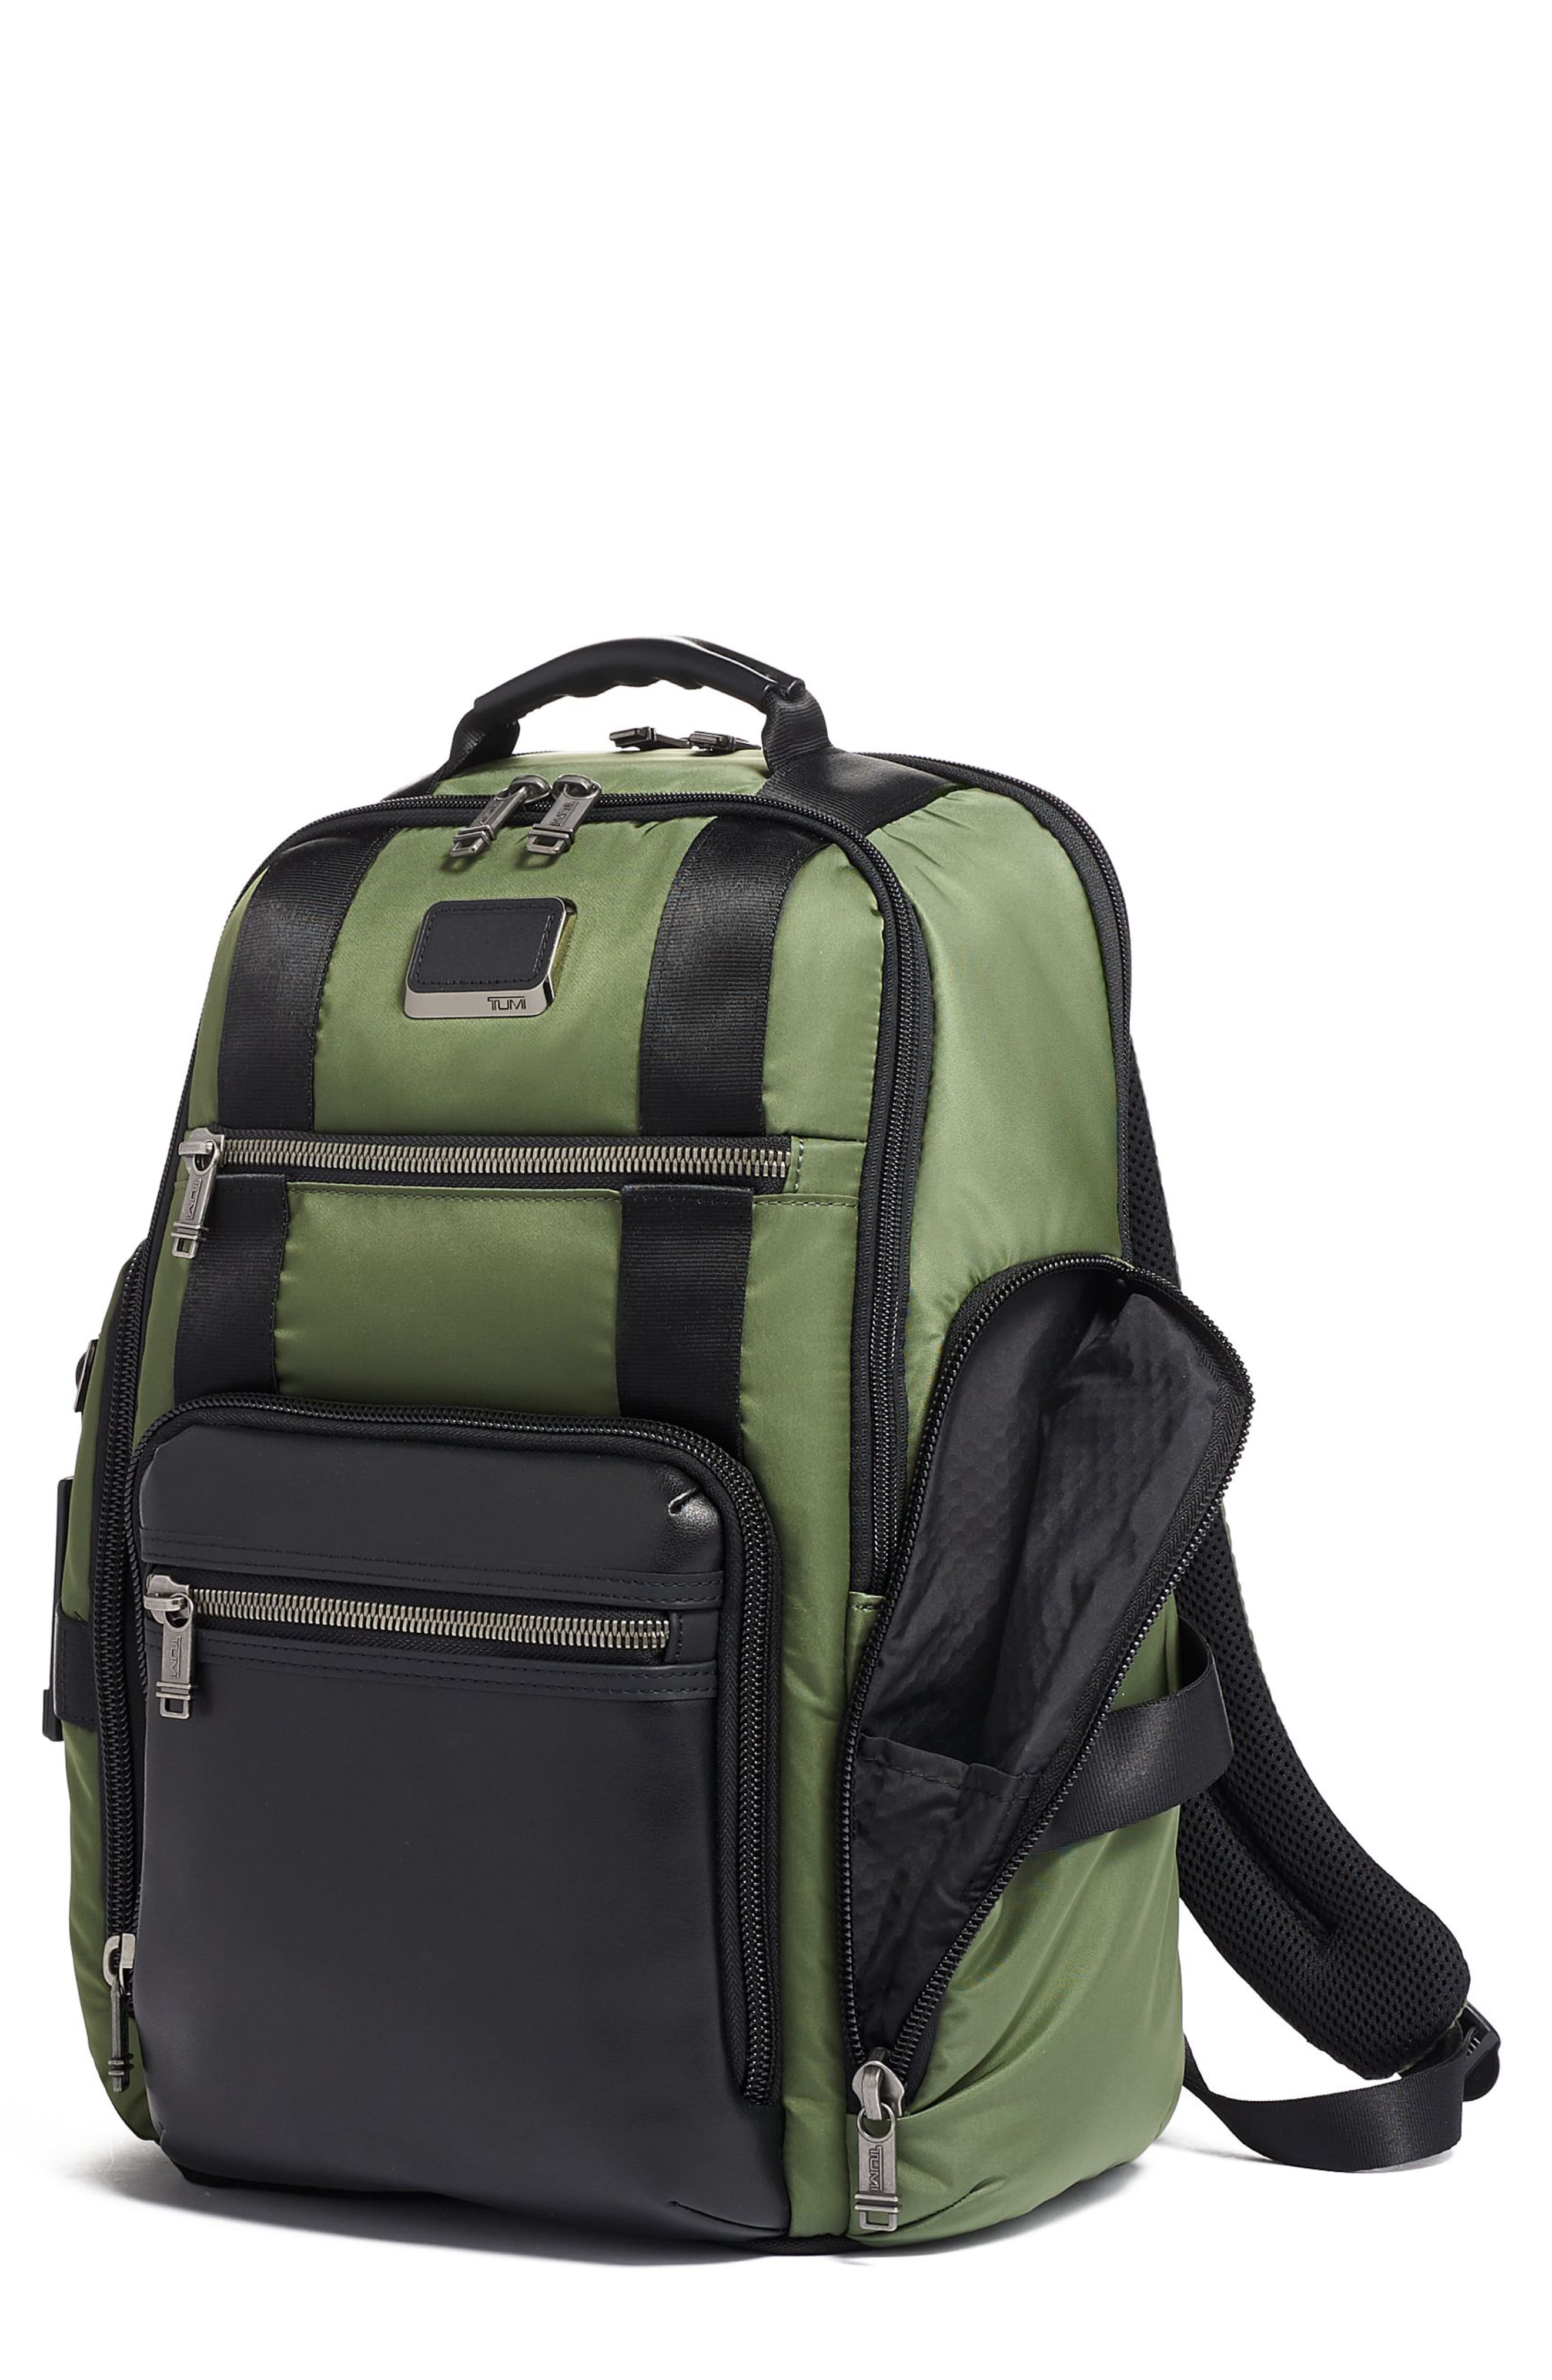 Tumi Sheppard Deluxe Backpack...Forest Green...$179.97 @ Nordstrom Rack